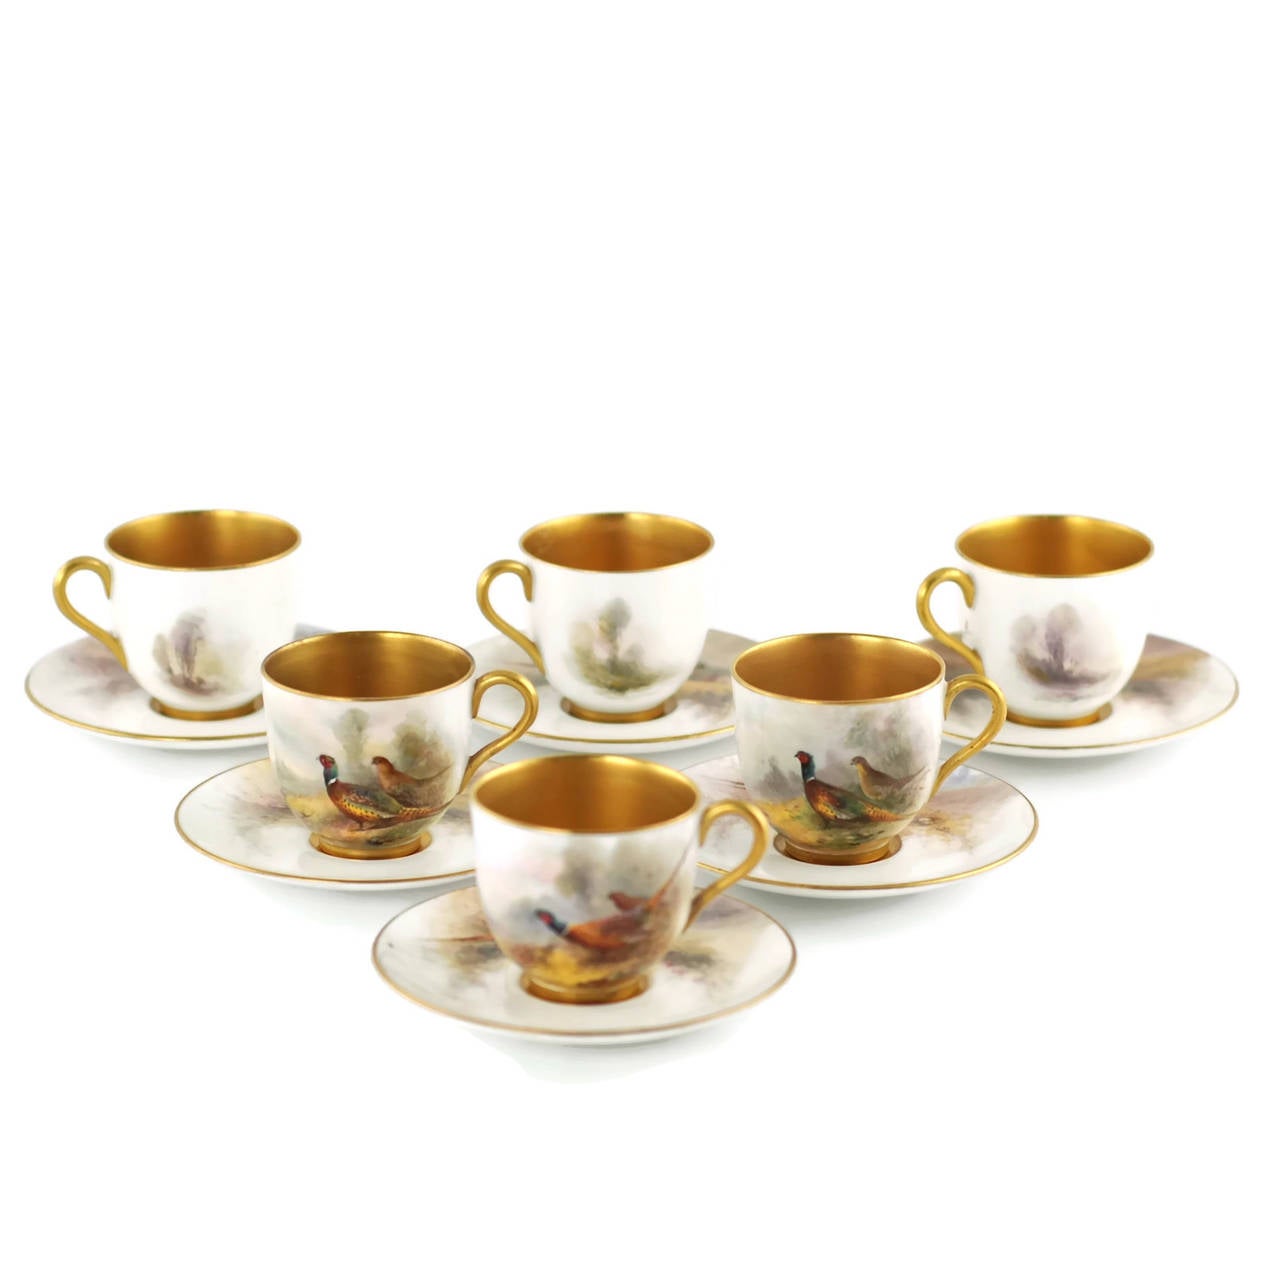 This English porcelain coffee set was manufactured by Royal Worcester and consists of six porcelain cups and six saucers along with six hand-painted enameled sterling silver spoons. The cups and saucers have been decorated with images of ring-necked